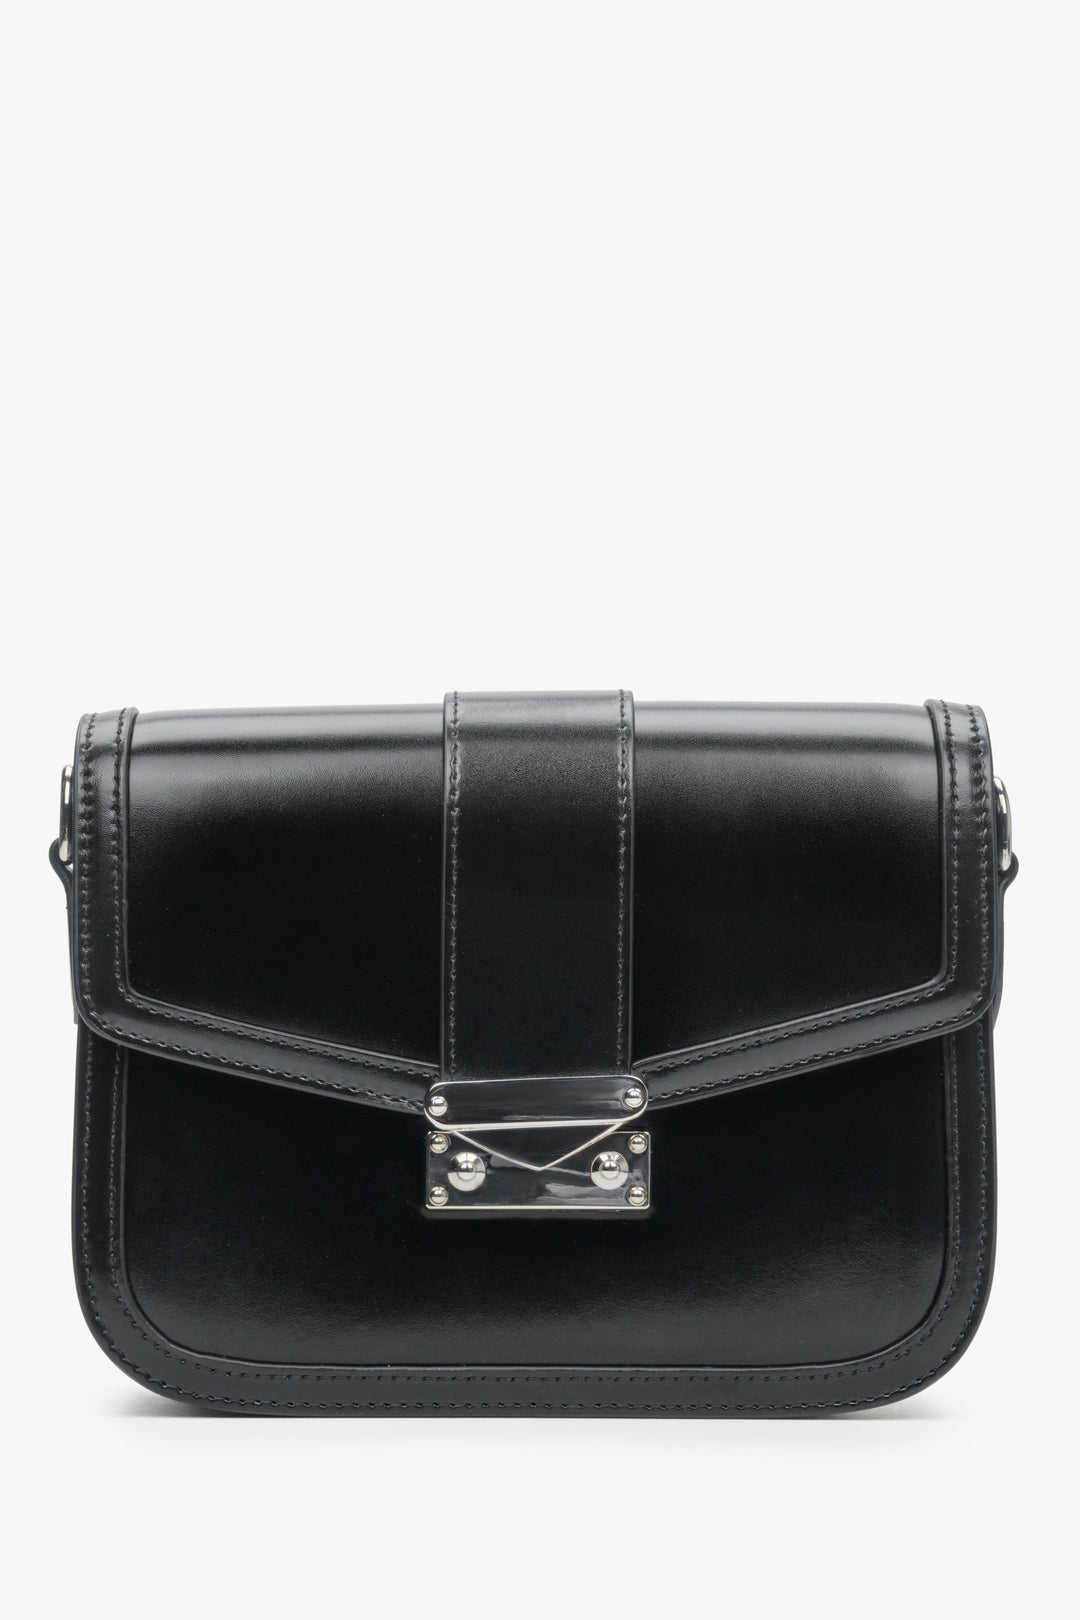 A black leather women's bag by Estro with silver fittings.